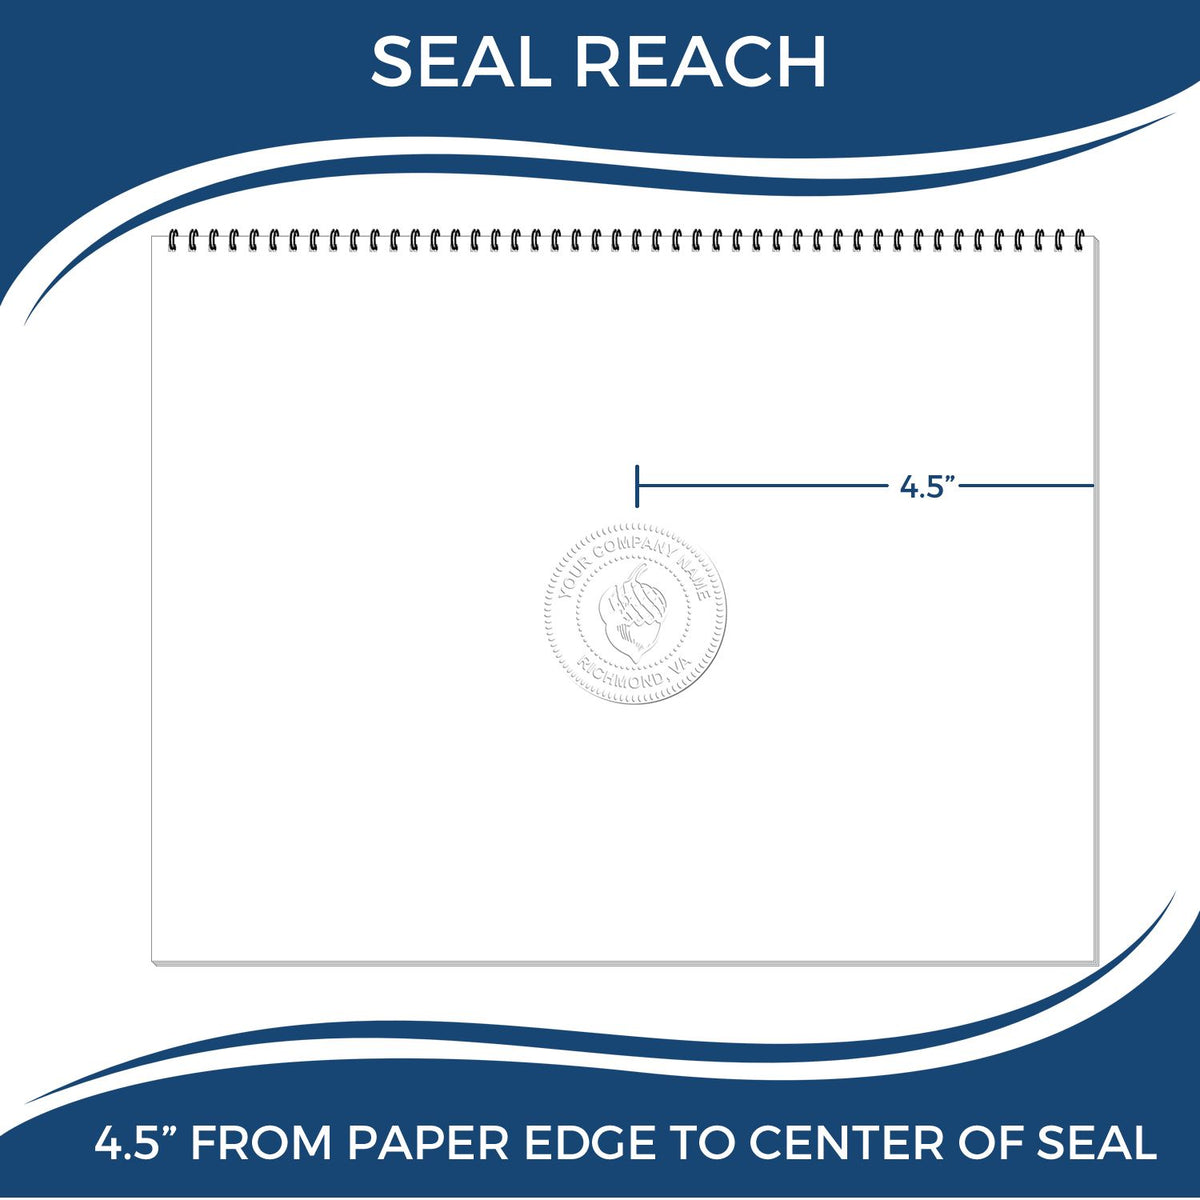 An infographic showing the seal reach which is represented by a ruler and a miniature seal image of the Extended Long Reach Massachusetts Surveyor Embosser